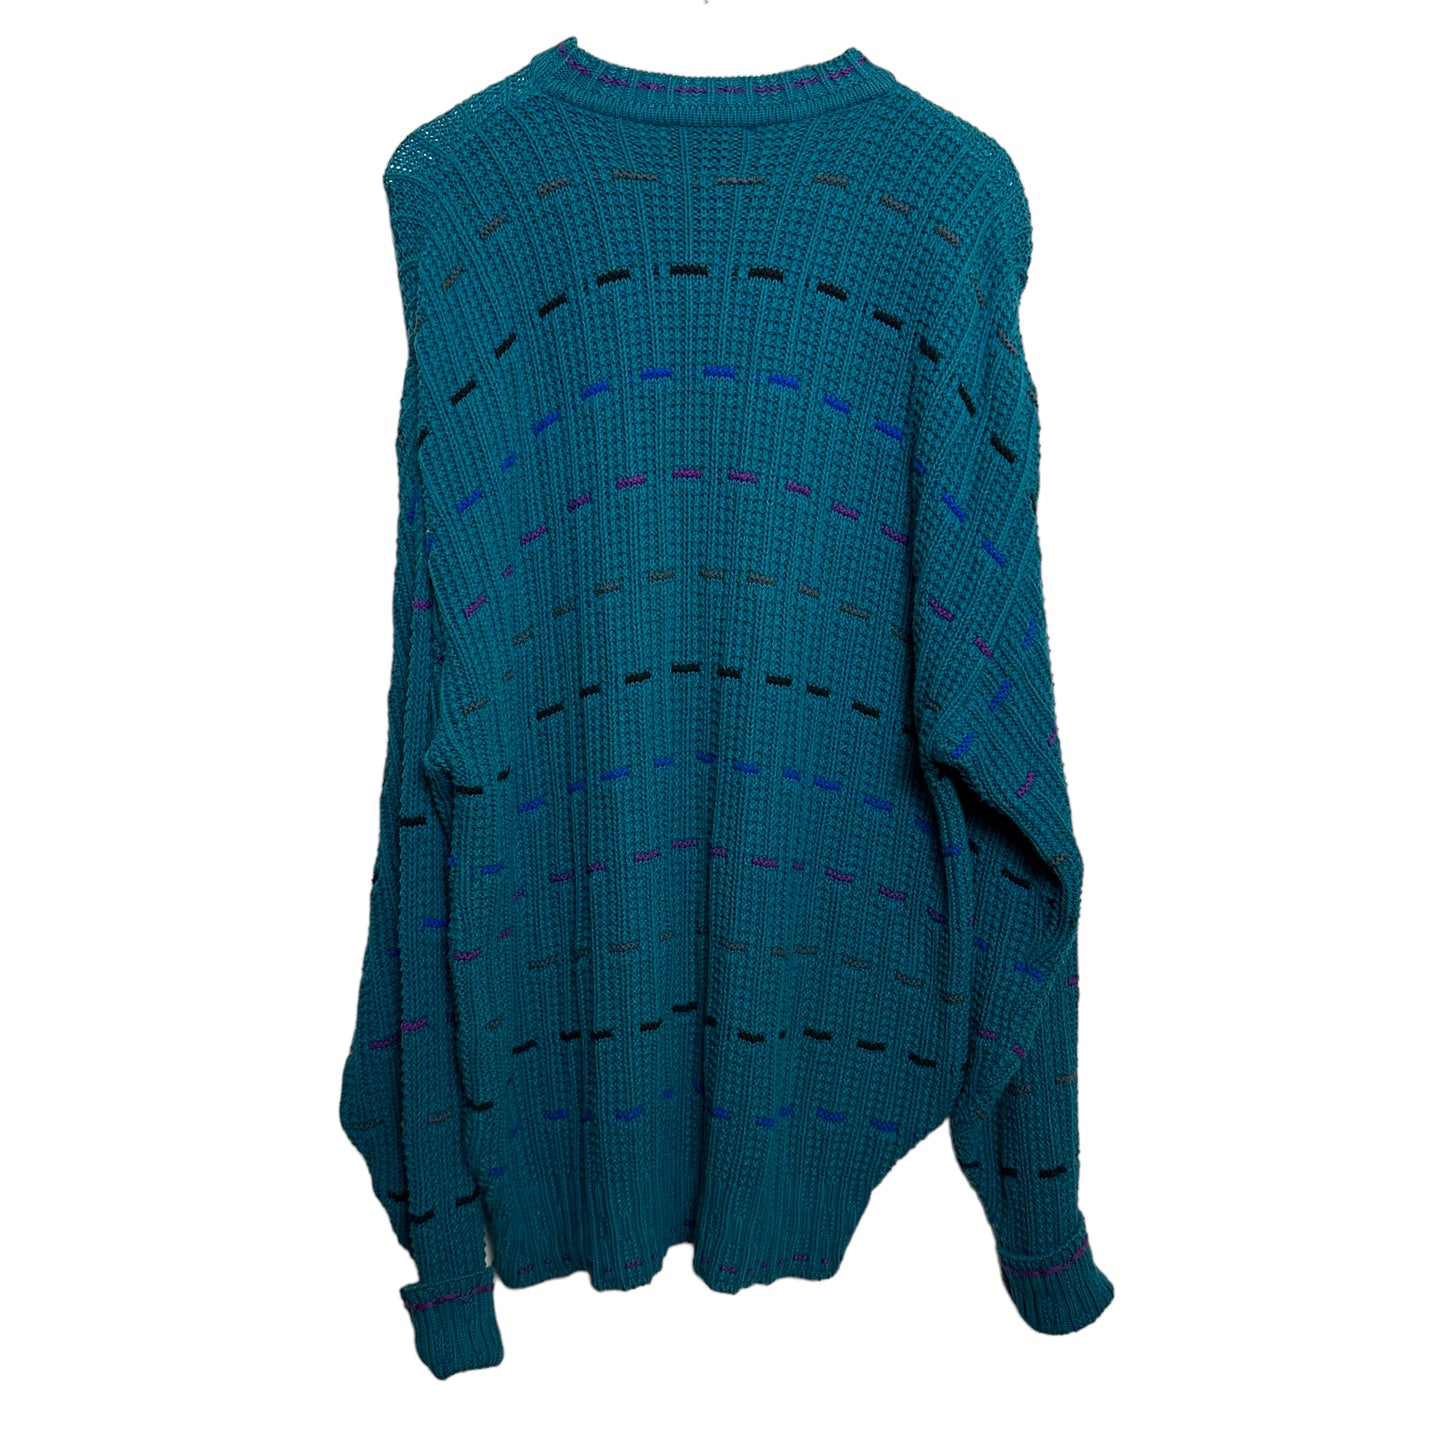 Vintage 90s Colours by Alexander Julian Chunky Knit Grandpa Sweater Crewneck Teal XL